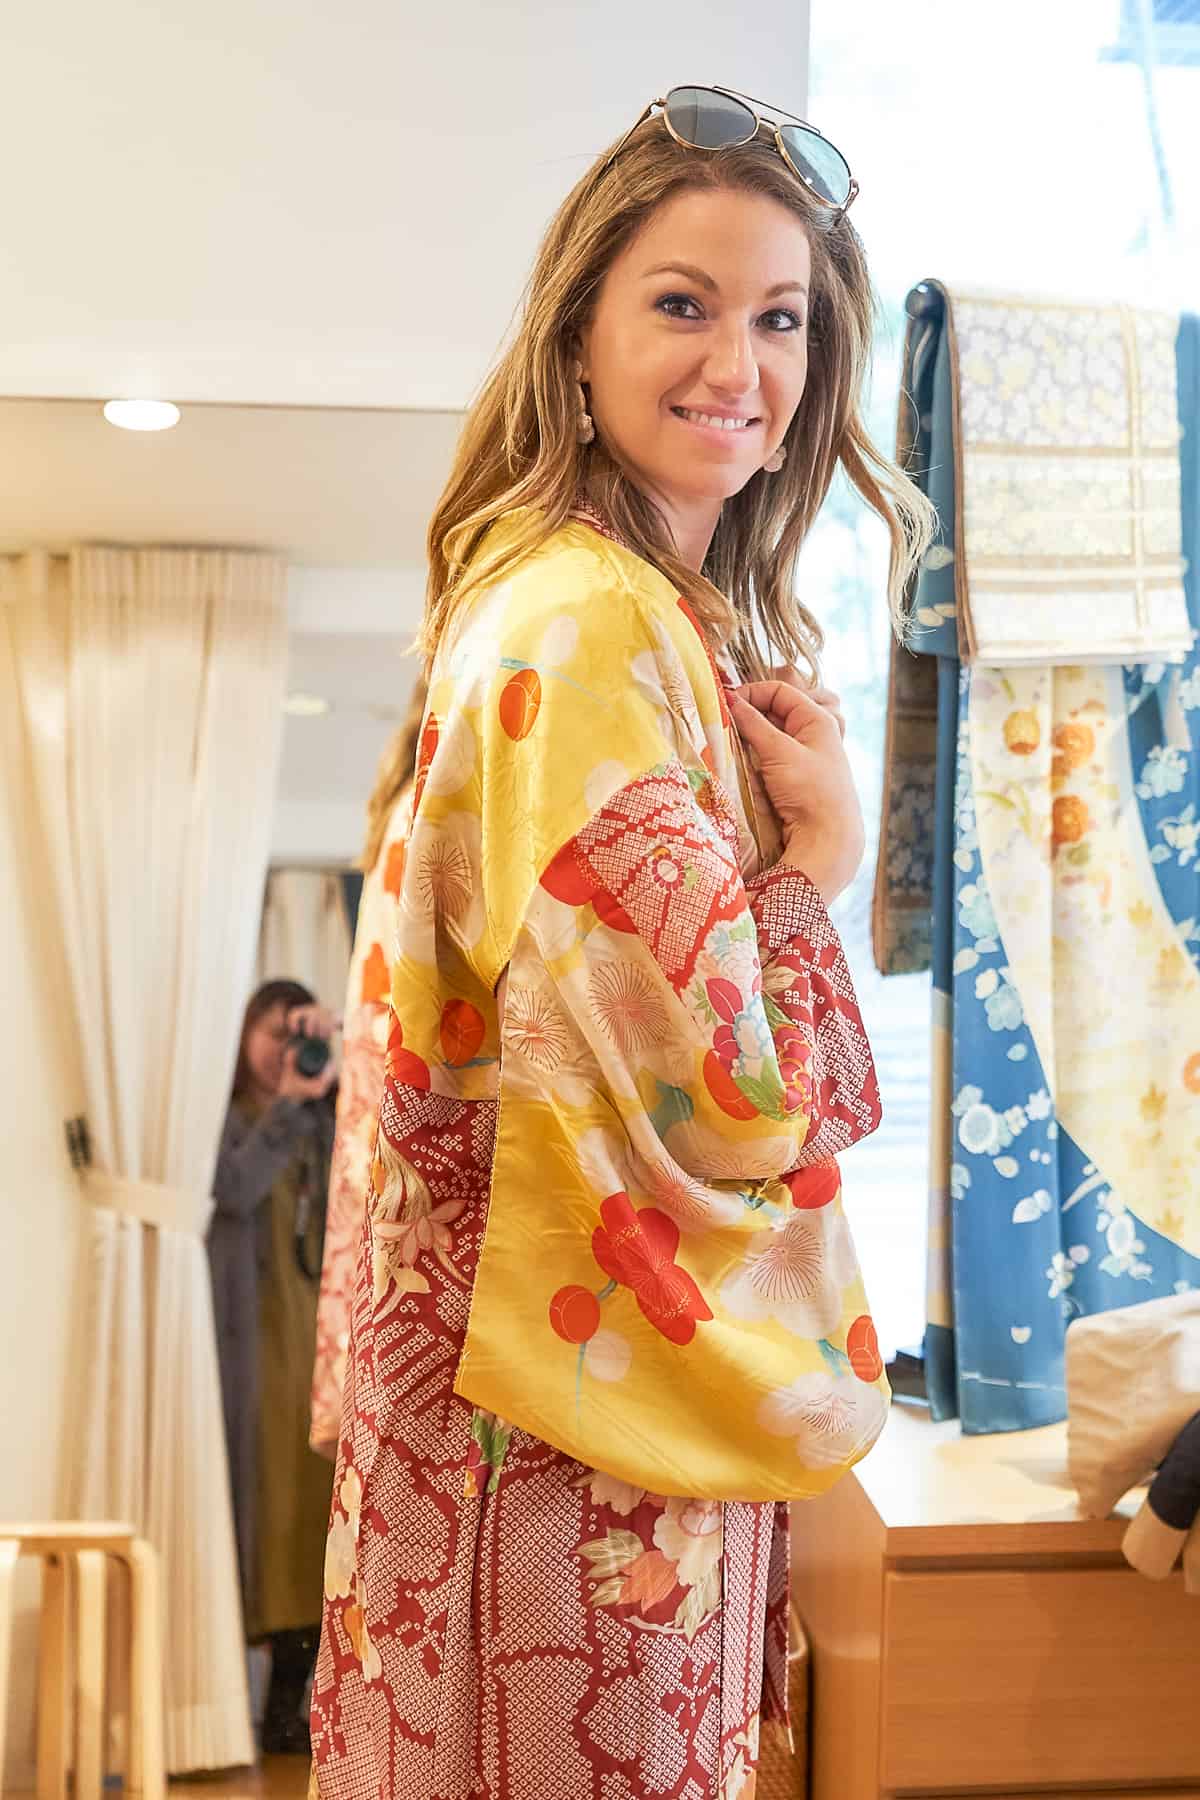 Trying on Kimonos at a store in Omotesando district of Tokyo